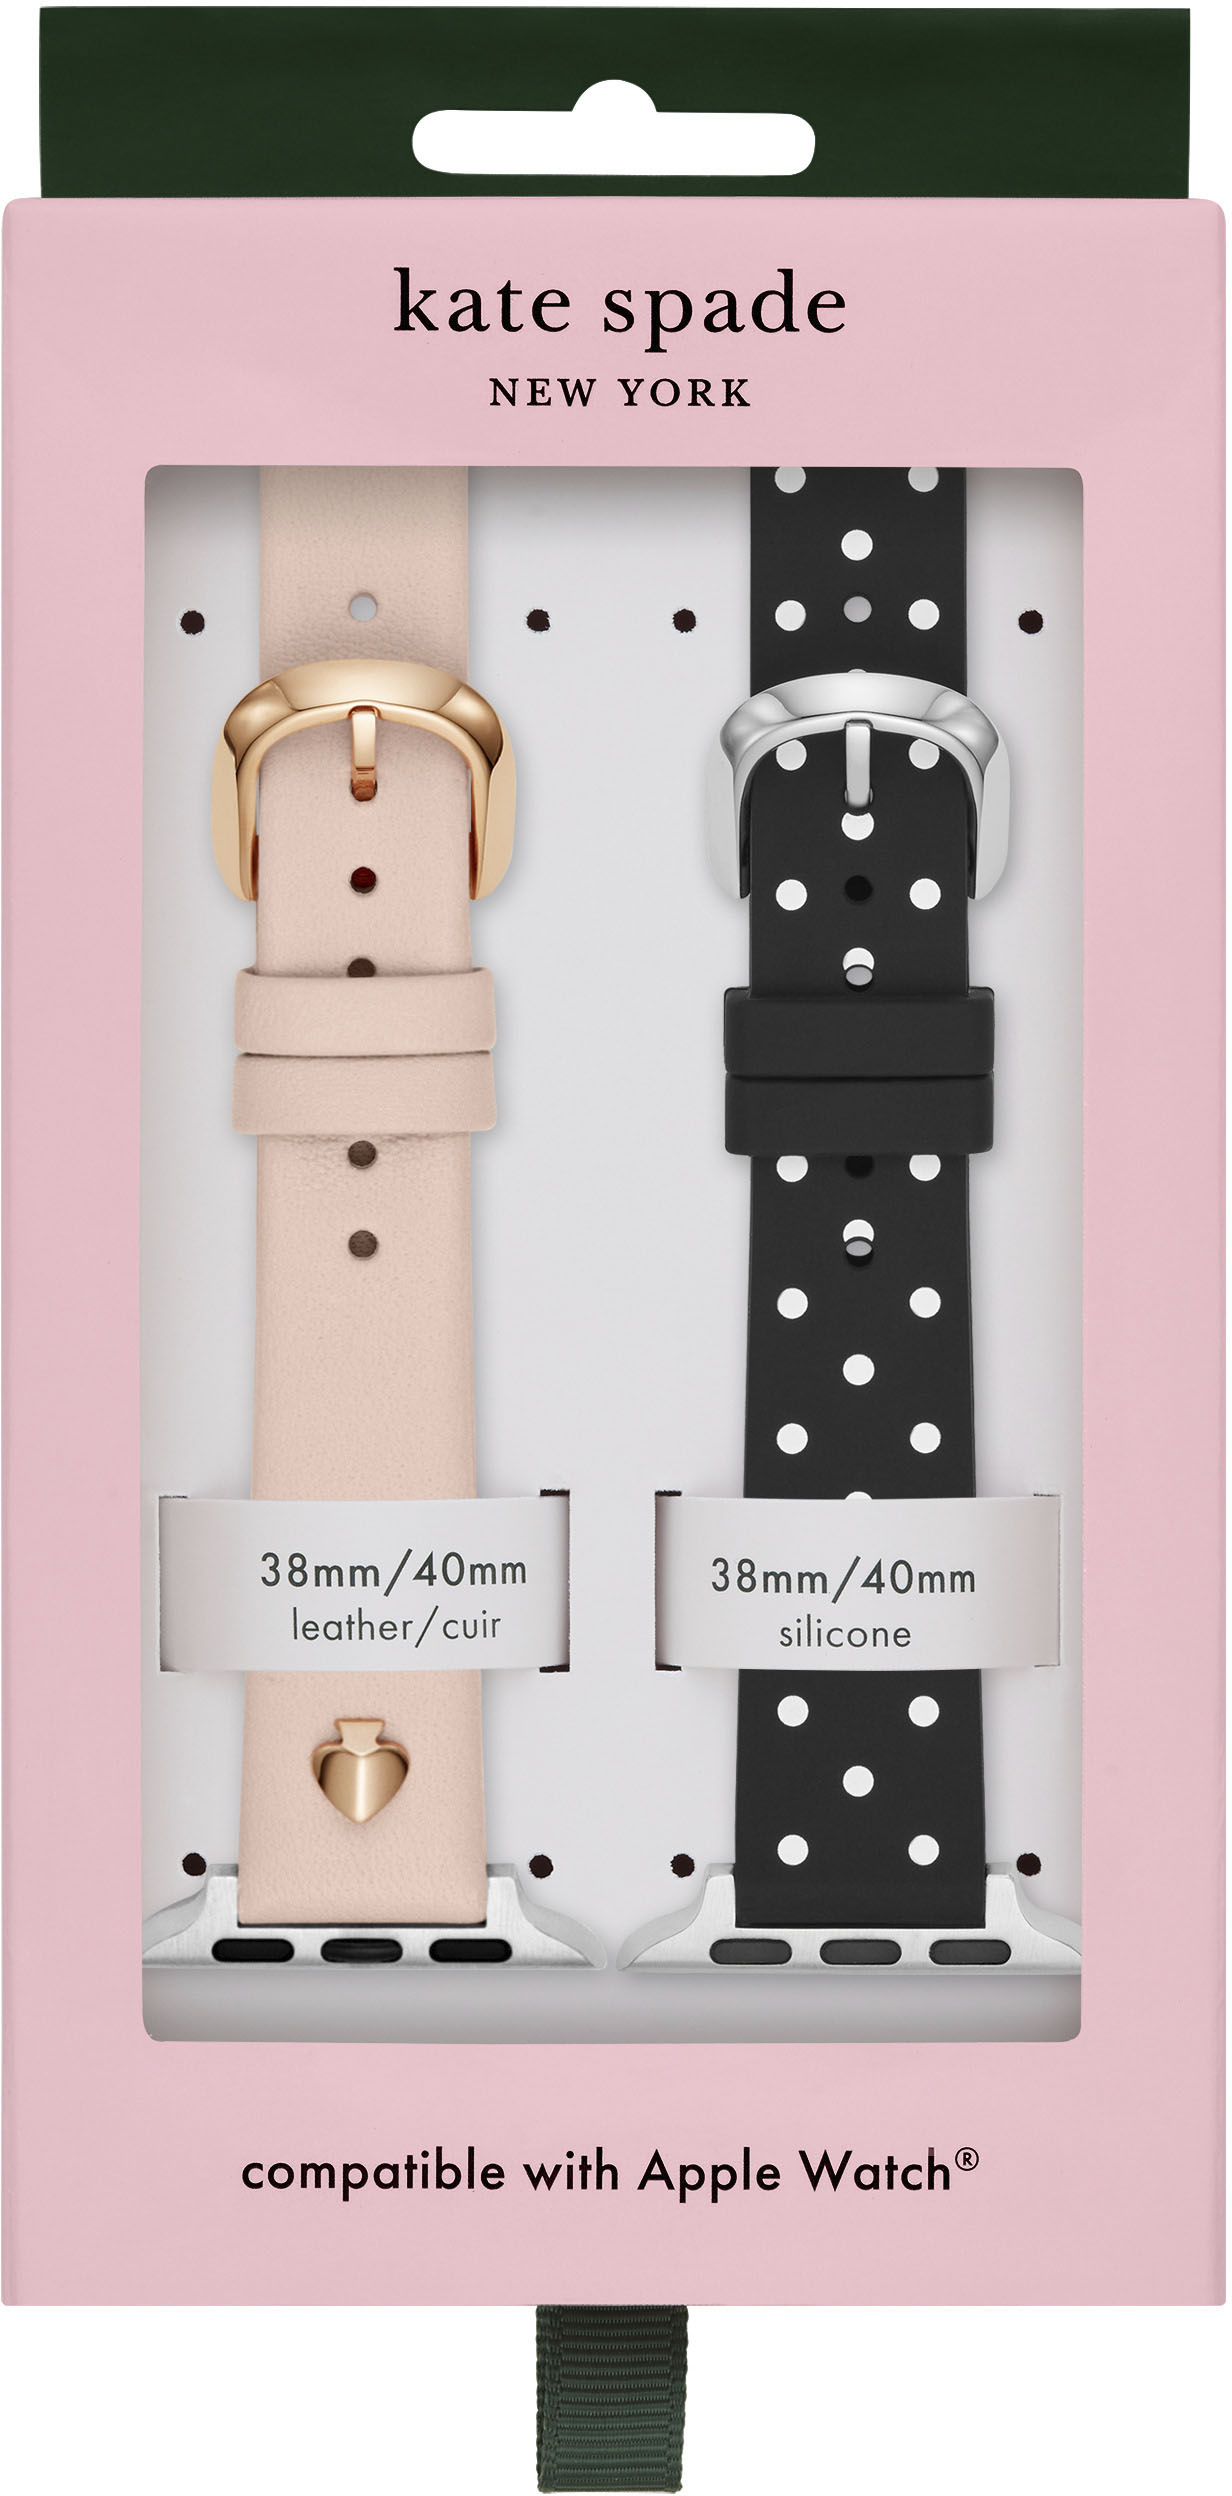 Left View: Kate Spade New York Blush Leather and Black Dot Silicone 38/40mm Gift Set for Apple Watch® - Blush and Black